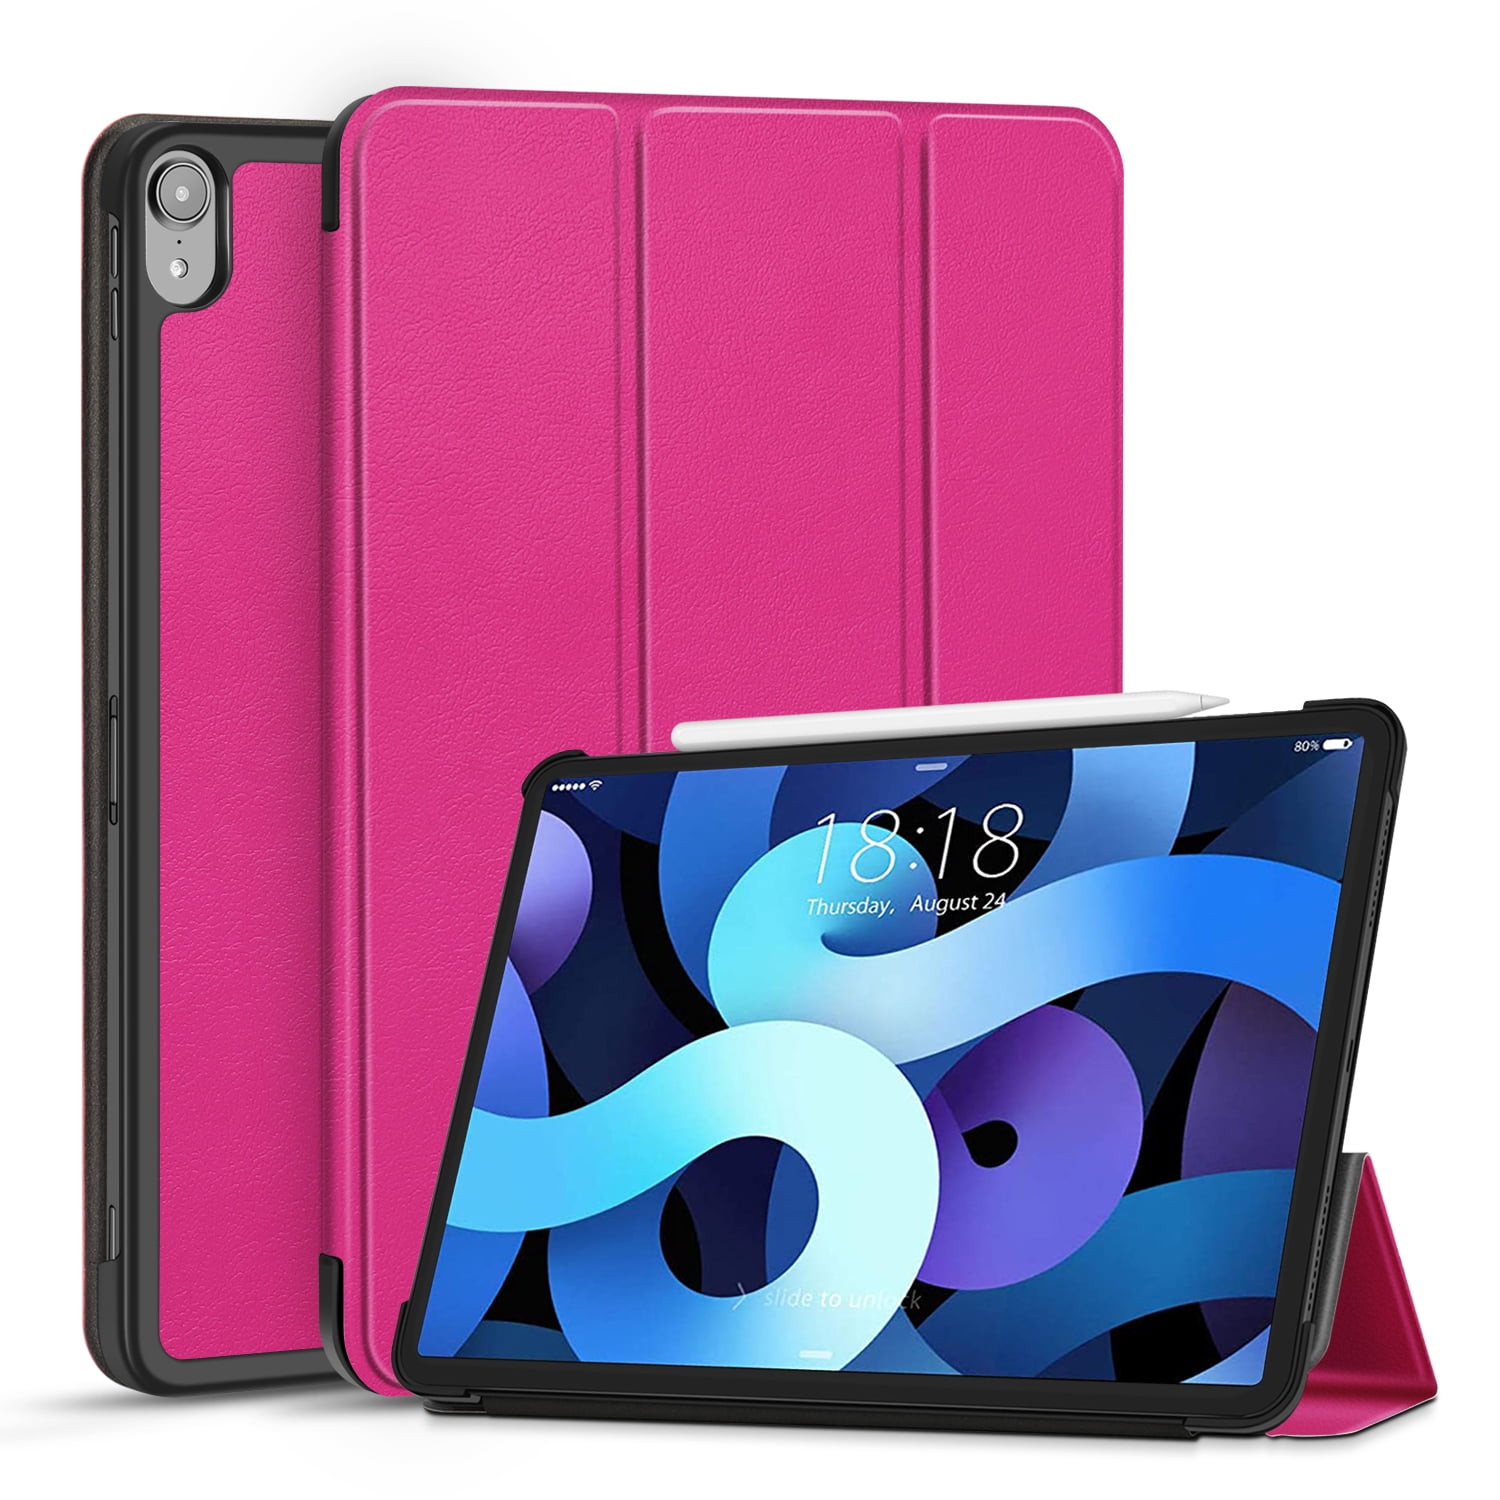  ProCase iPad Air 5 Case 2022/iPad Air 4 Case 2020 10.9 Inch  with Pencil Holder, Slim Stand Smart Folio Protective Cover for iPad Air  10.9 5th /4th Generation A2589 A2591 A2324